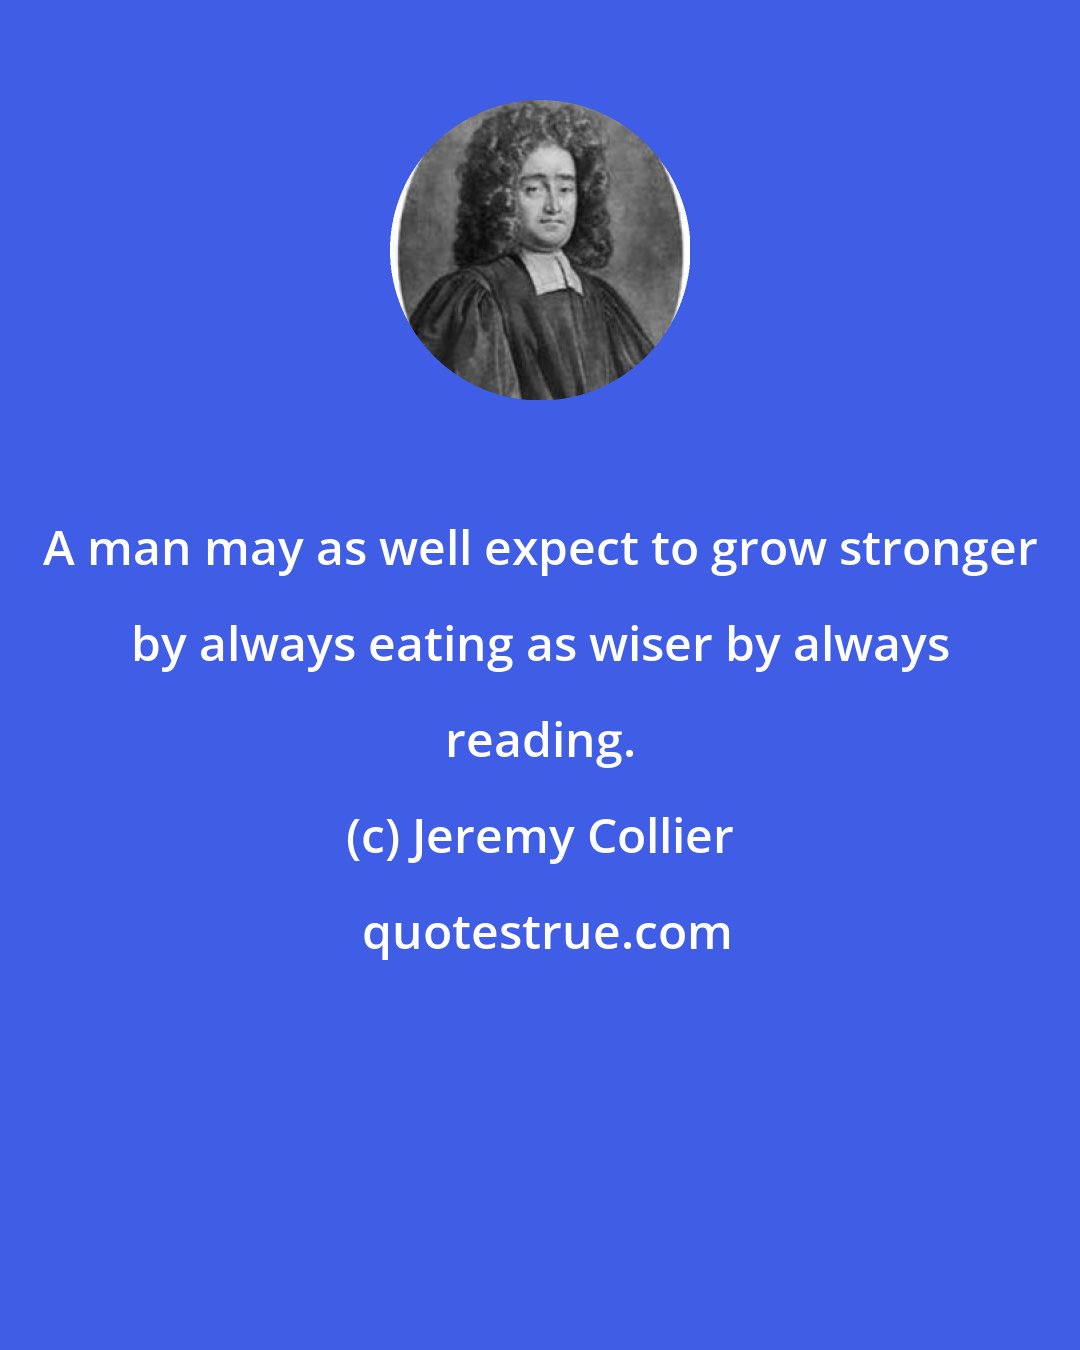 Jeremy Collier: A man may as well expect to grow stronger by always eating as wiser by always reading.